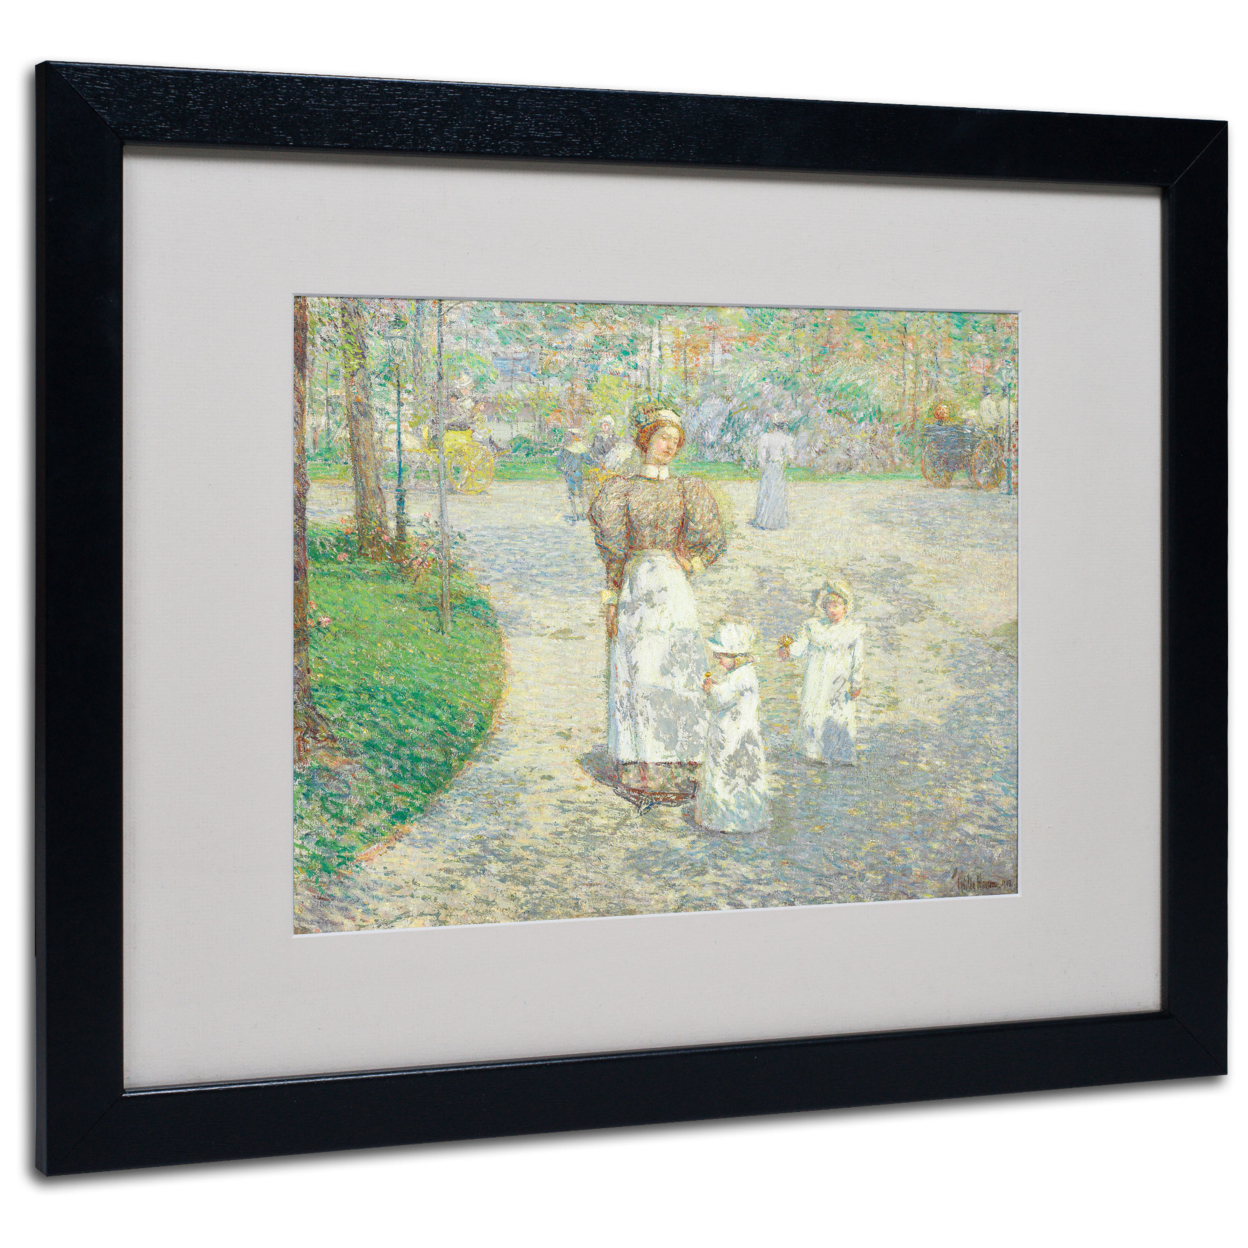 Childe Hassam 'Spring In Central Park' Black Wooden Framed Art 18 X 22 Inches